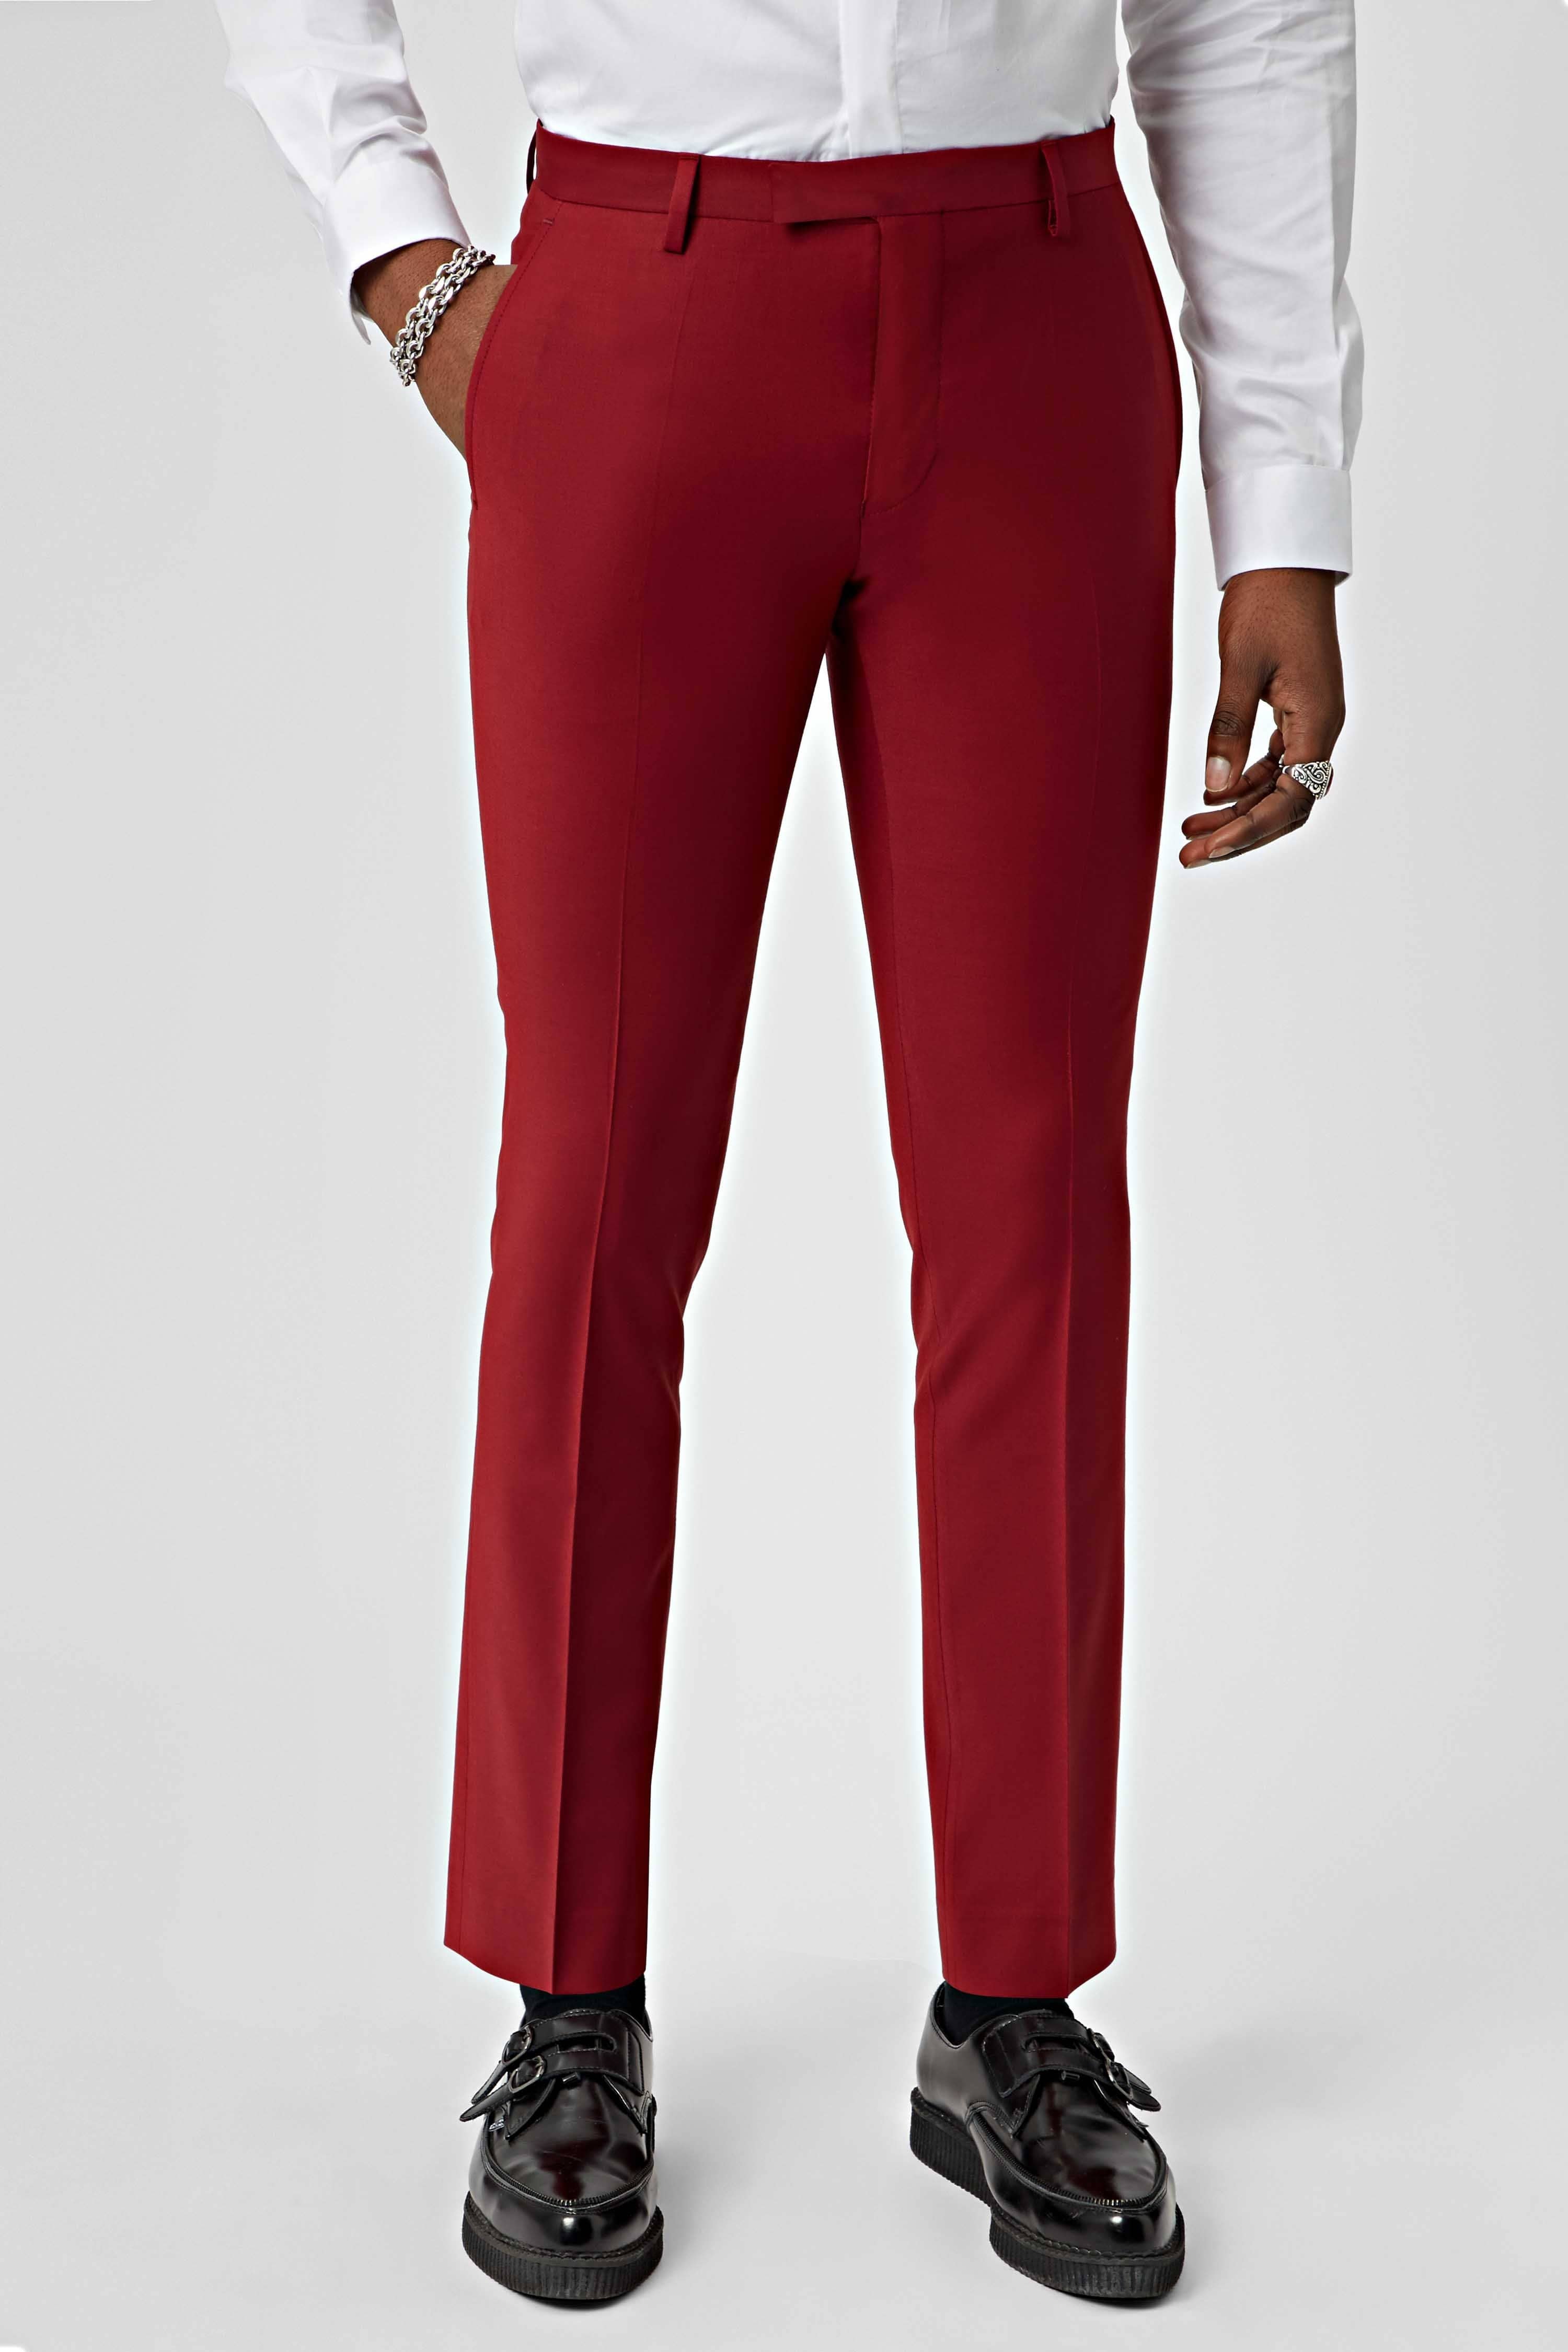 Buy Maroon Twill Lapel Co-ord Blazer And Pant Set For Women by Emblaze  Online at Aza Fashions.